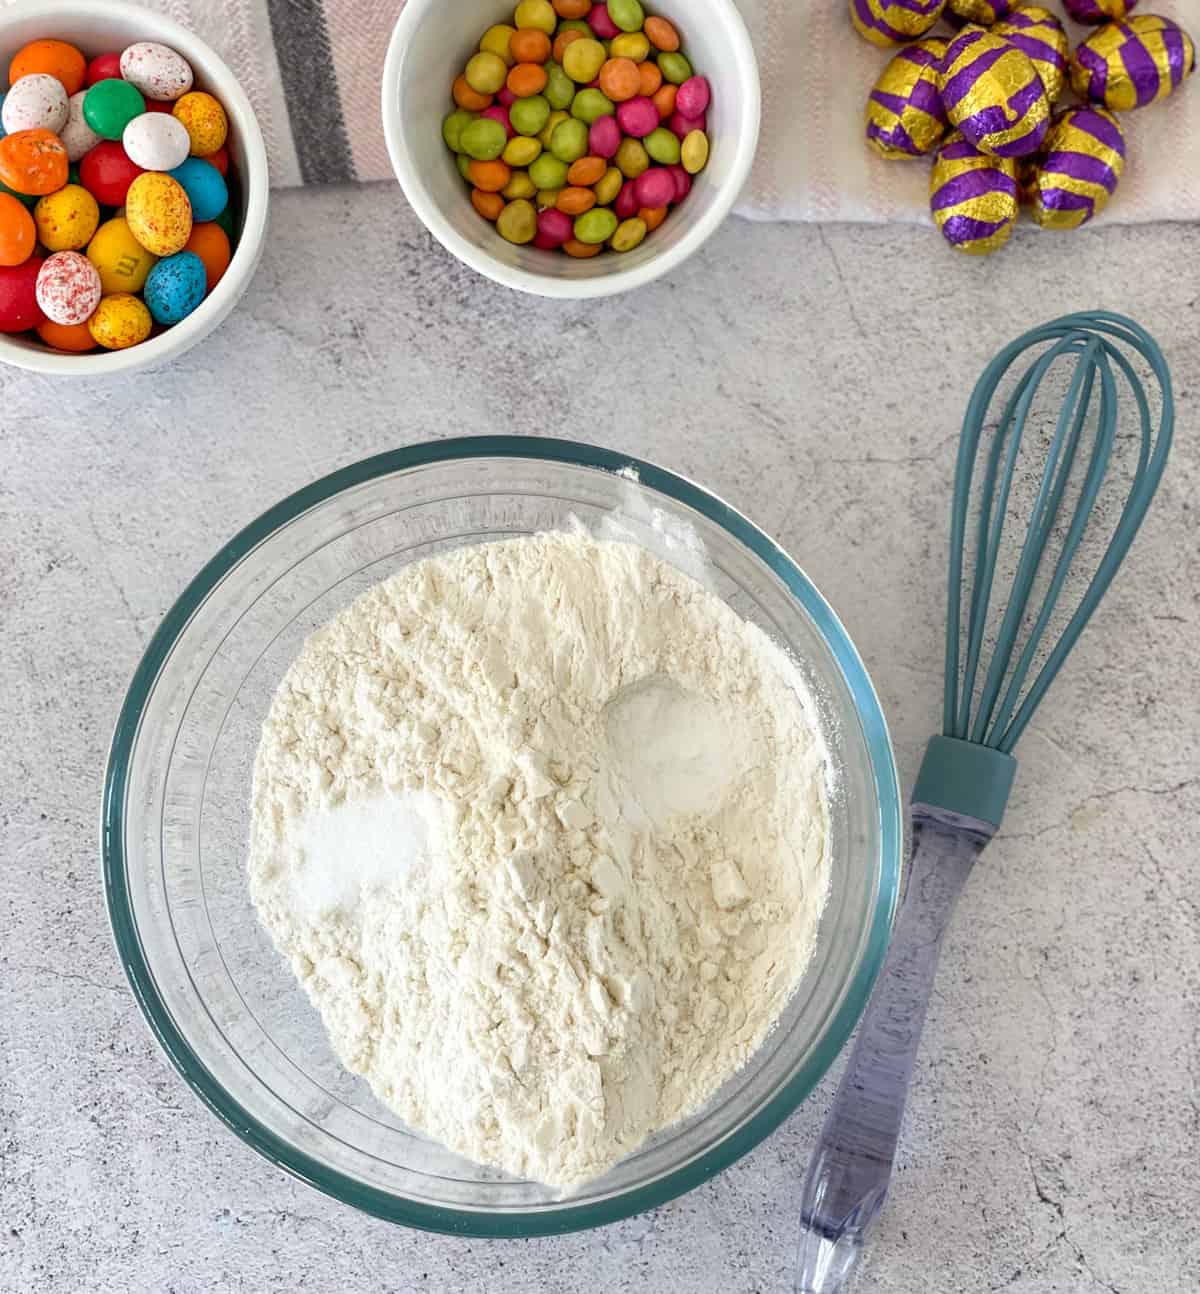 Combine the dry ingredients first, a bowl with flour, salt and baking soda with bowls of easter eggs nearby